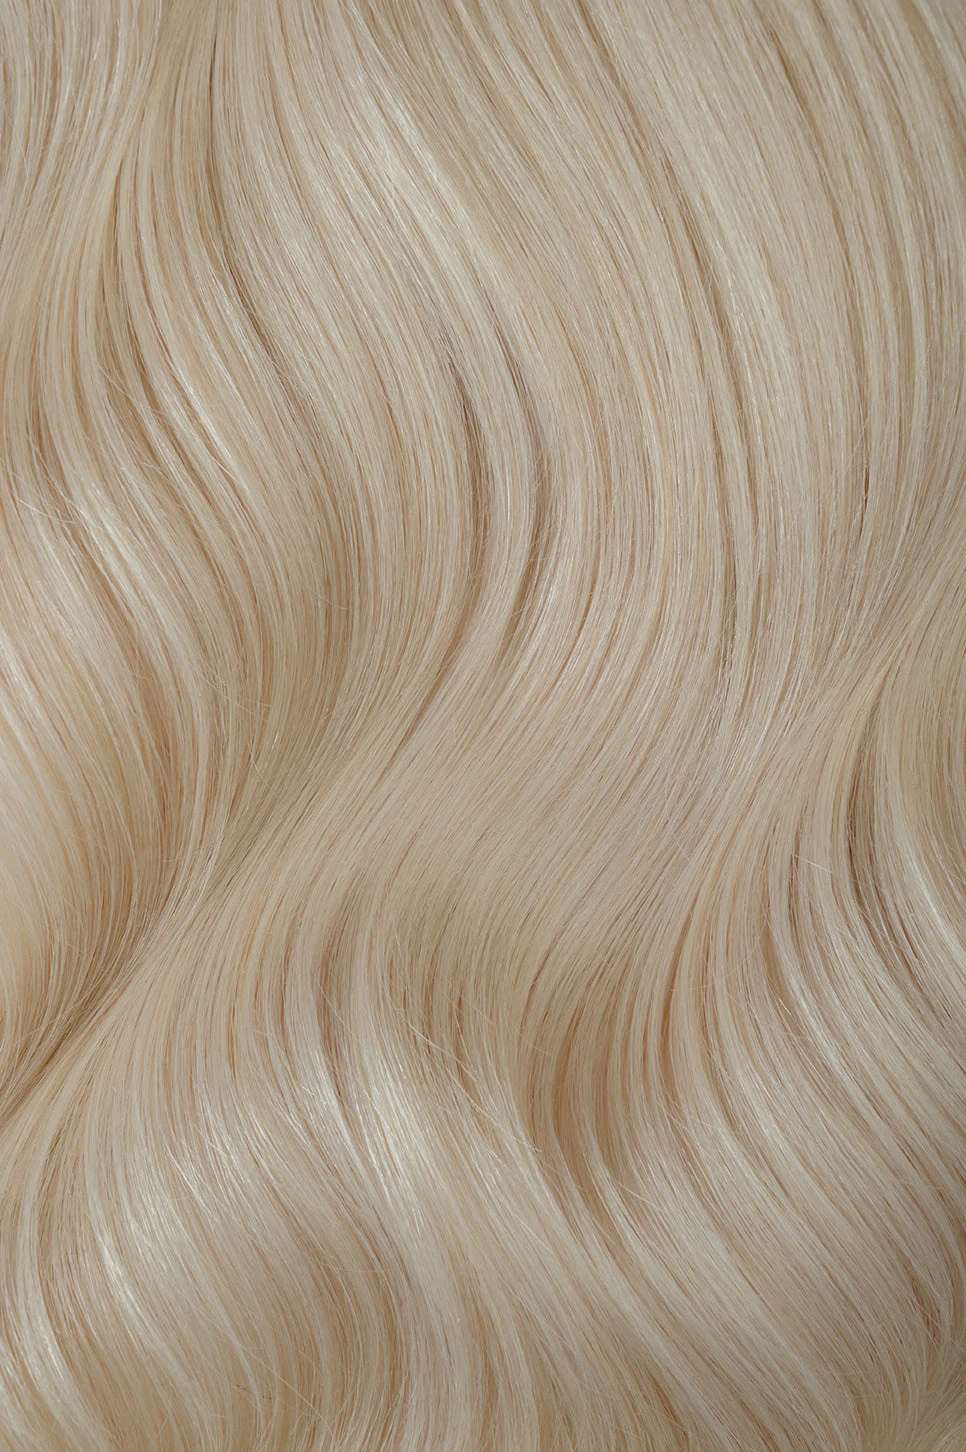 #60 Whitest Ash Blonde Clip In Hair Extensions 7PCS